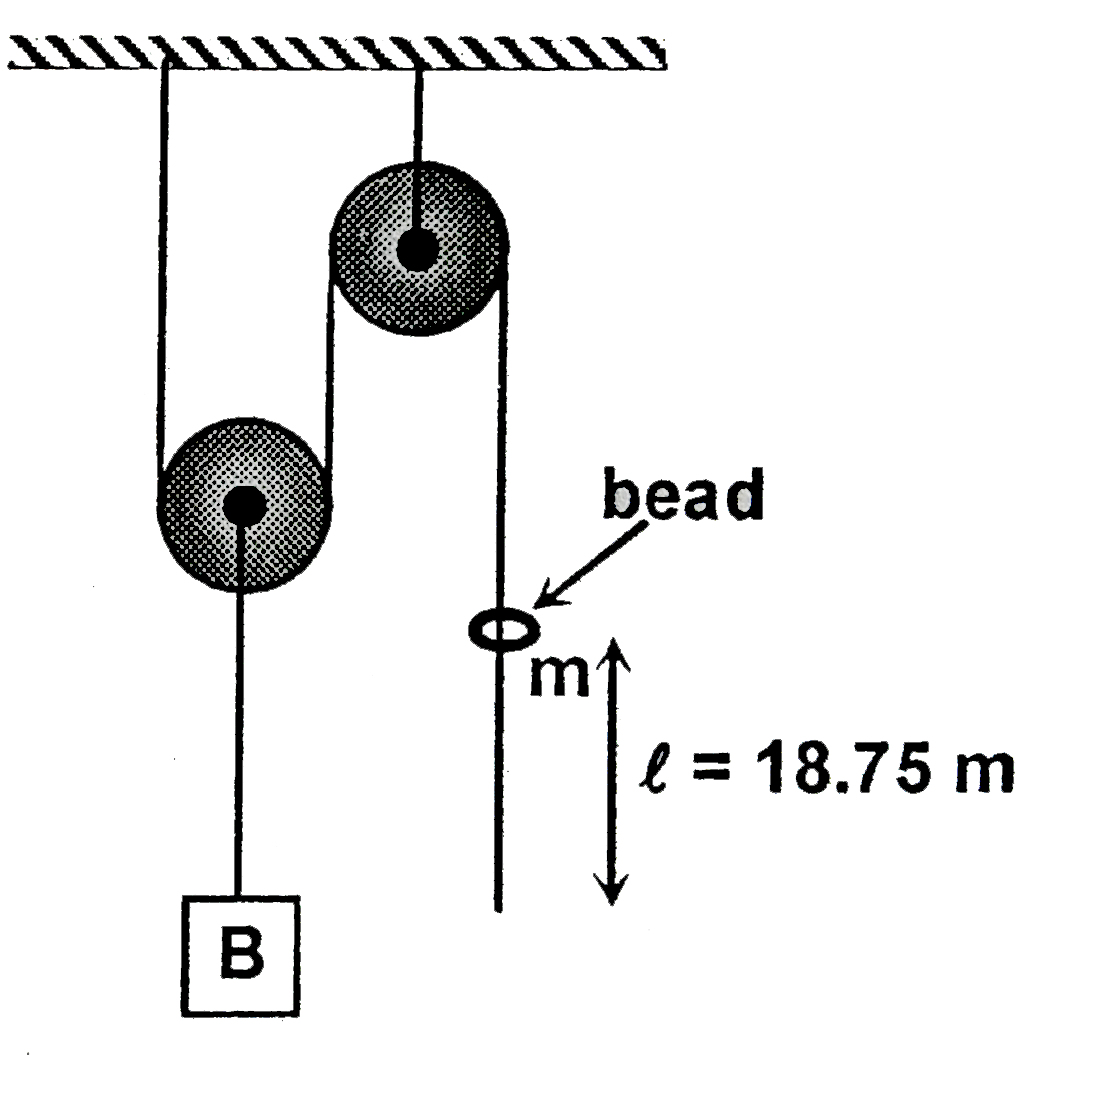 In the system shown in the figure , a bead of mass m can slide on the string. There is friction beween the bead and the string. Block B has mass equal to twice that of the bead. The system is released from rest with lenth l=18.75m of the string hanging below the bead. Assuming the pulley and string to be massless. Find the distance (in meter) moved by the block B before the bead slips out of the thread.